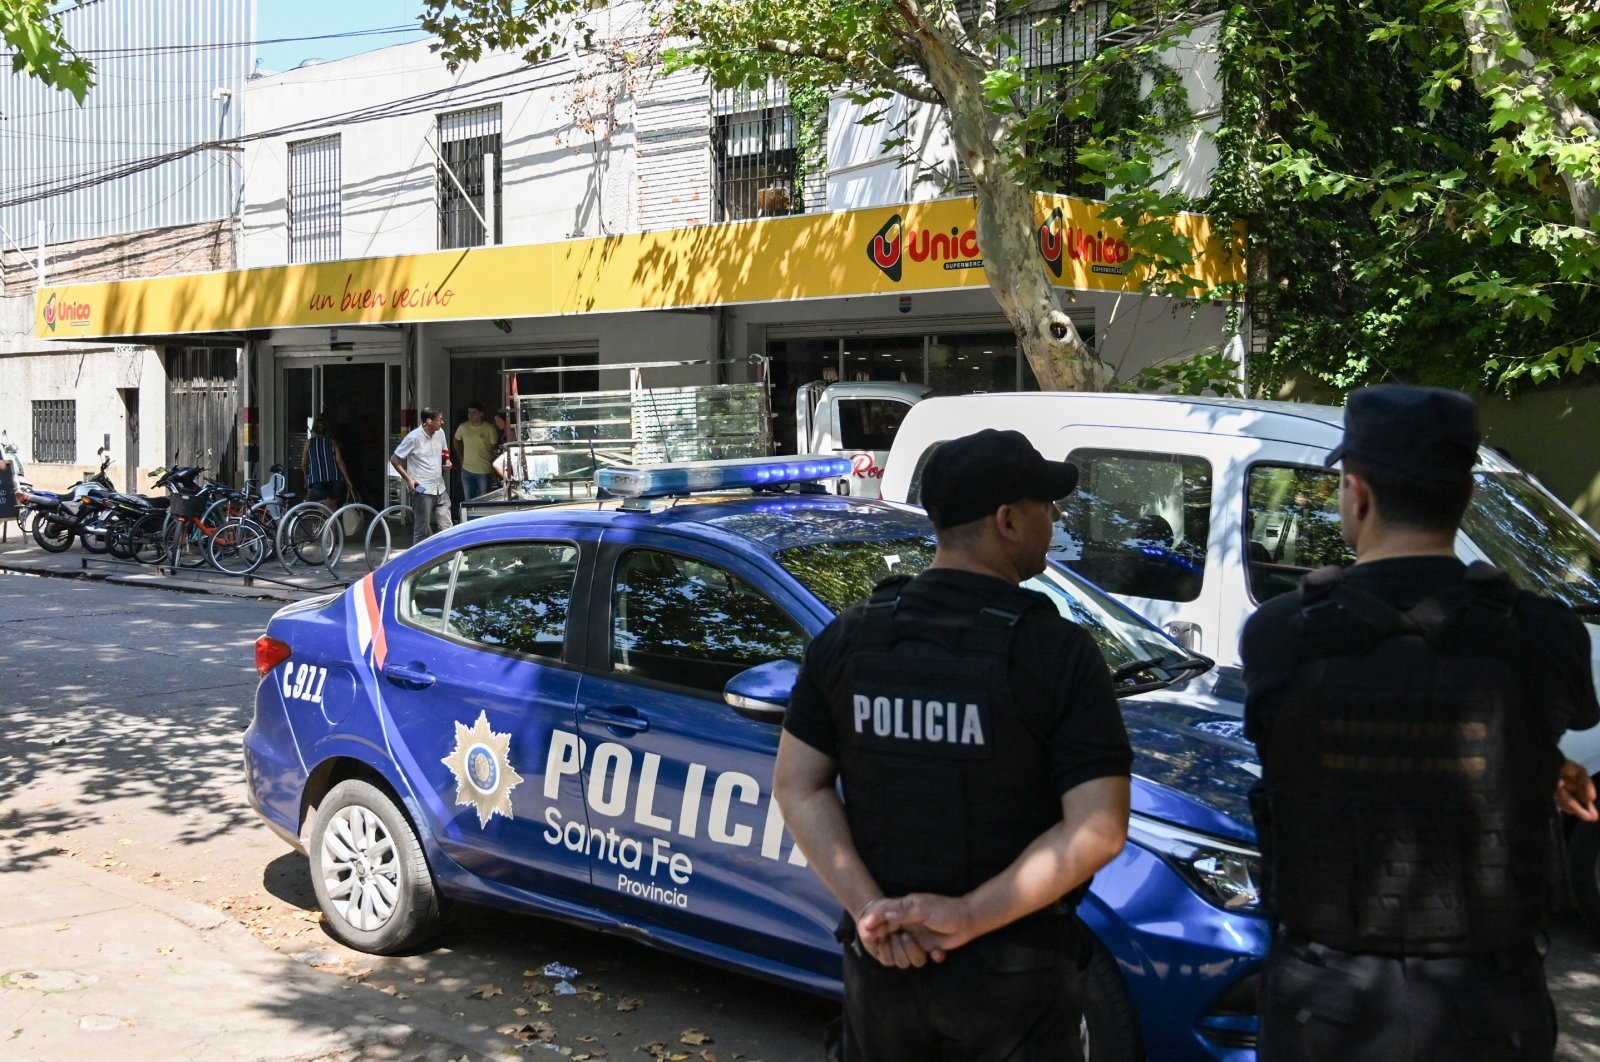 Police officers stand guard outside a supermarket that belongs to the family of Antonela Roccuzzo, wife of Argentine football star Lionel Messi, after two people on motorcycles attacked it and left a threatening message for Messi and the city mayor, Pablo Javkin, in Rosario, Argentina, March 2, 2023. (Reuters Photo)